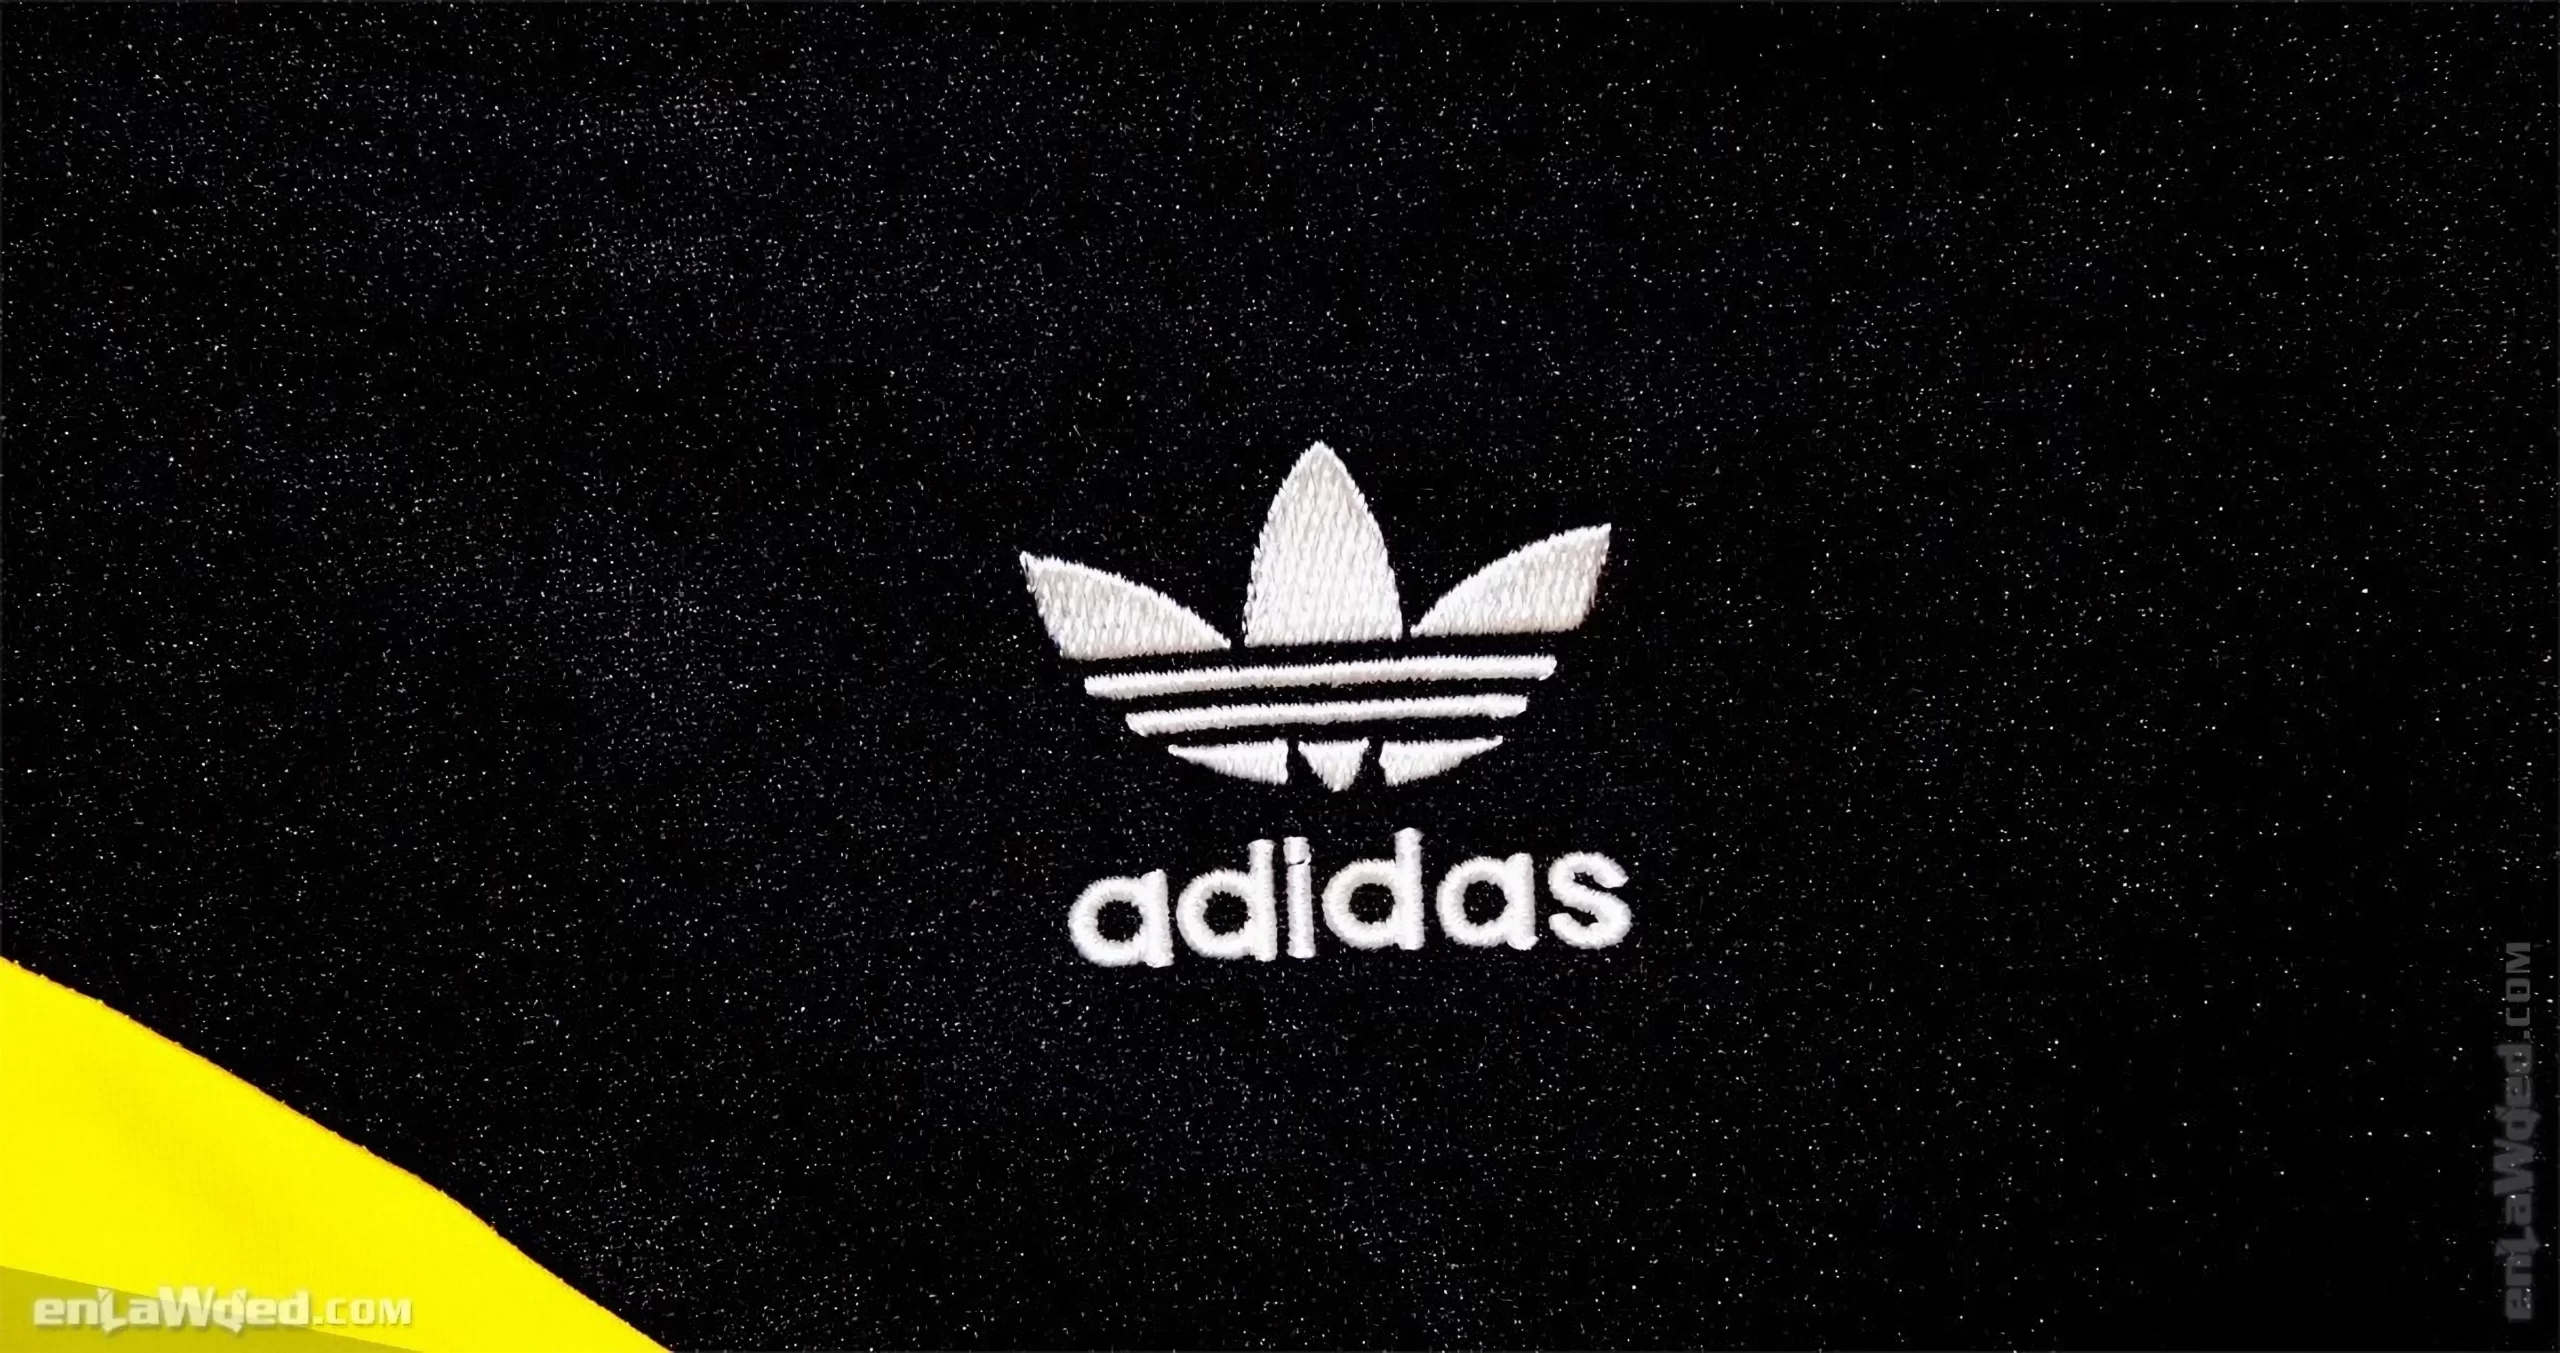 Men’s 2007 Cool Runnings Movie Track Top by Adidas: Recognized (EnLawded.com file #lmch9tqgvs2f3k1ls6q)